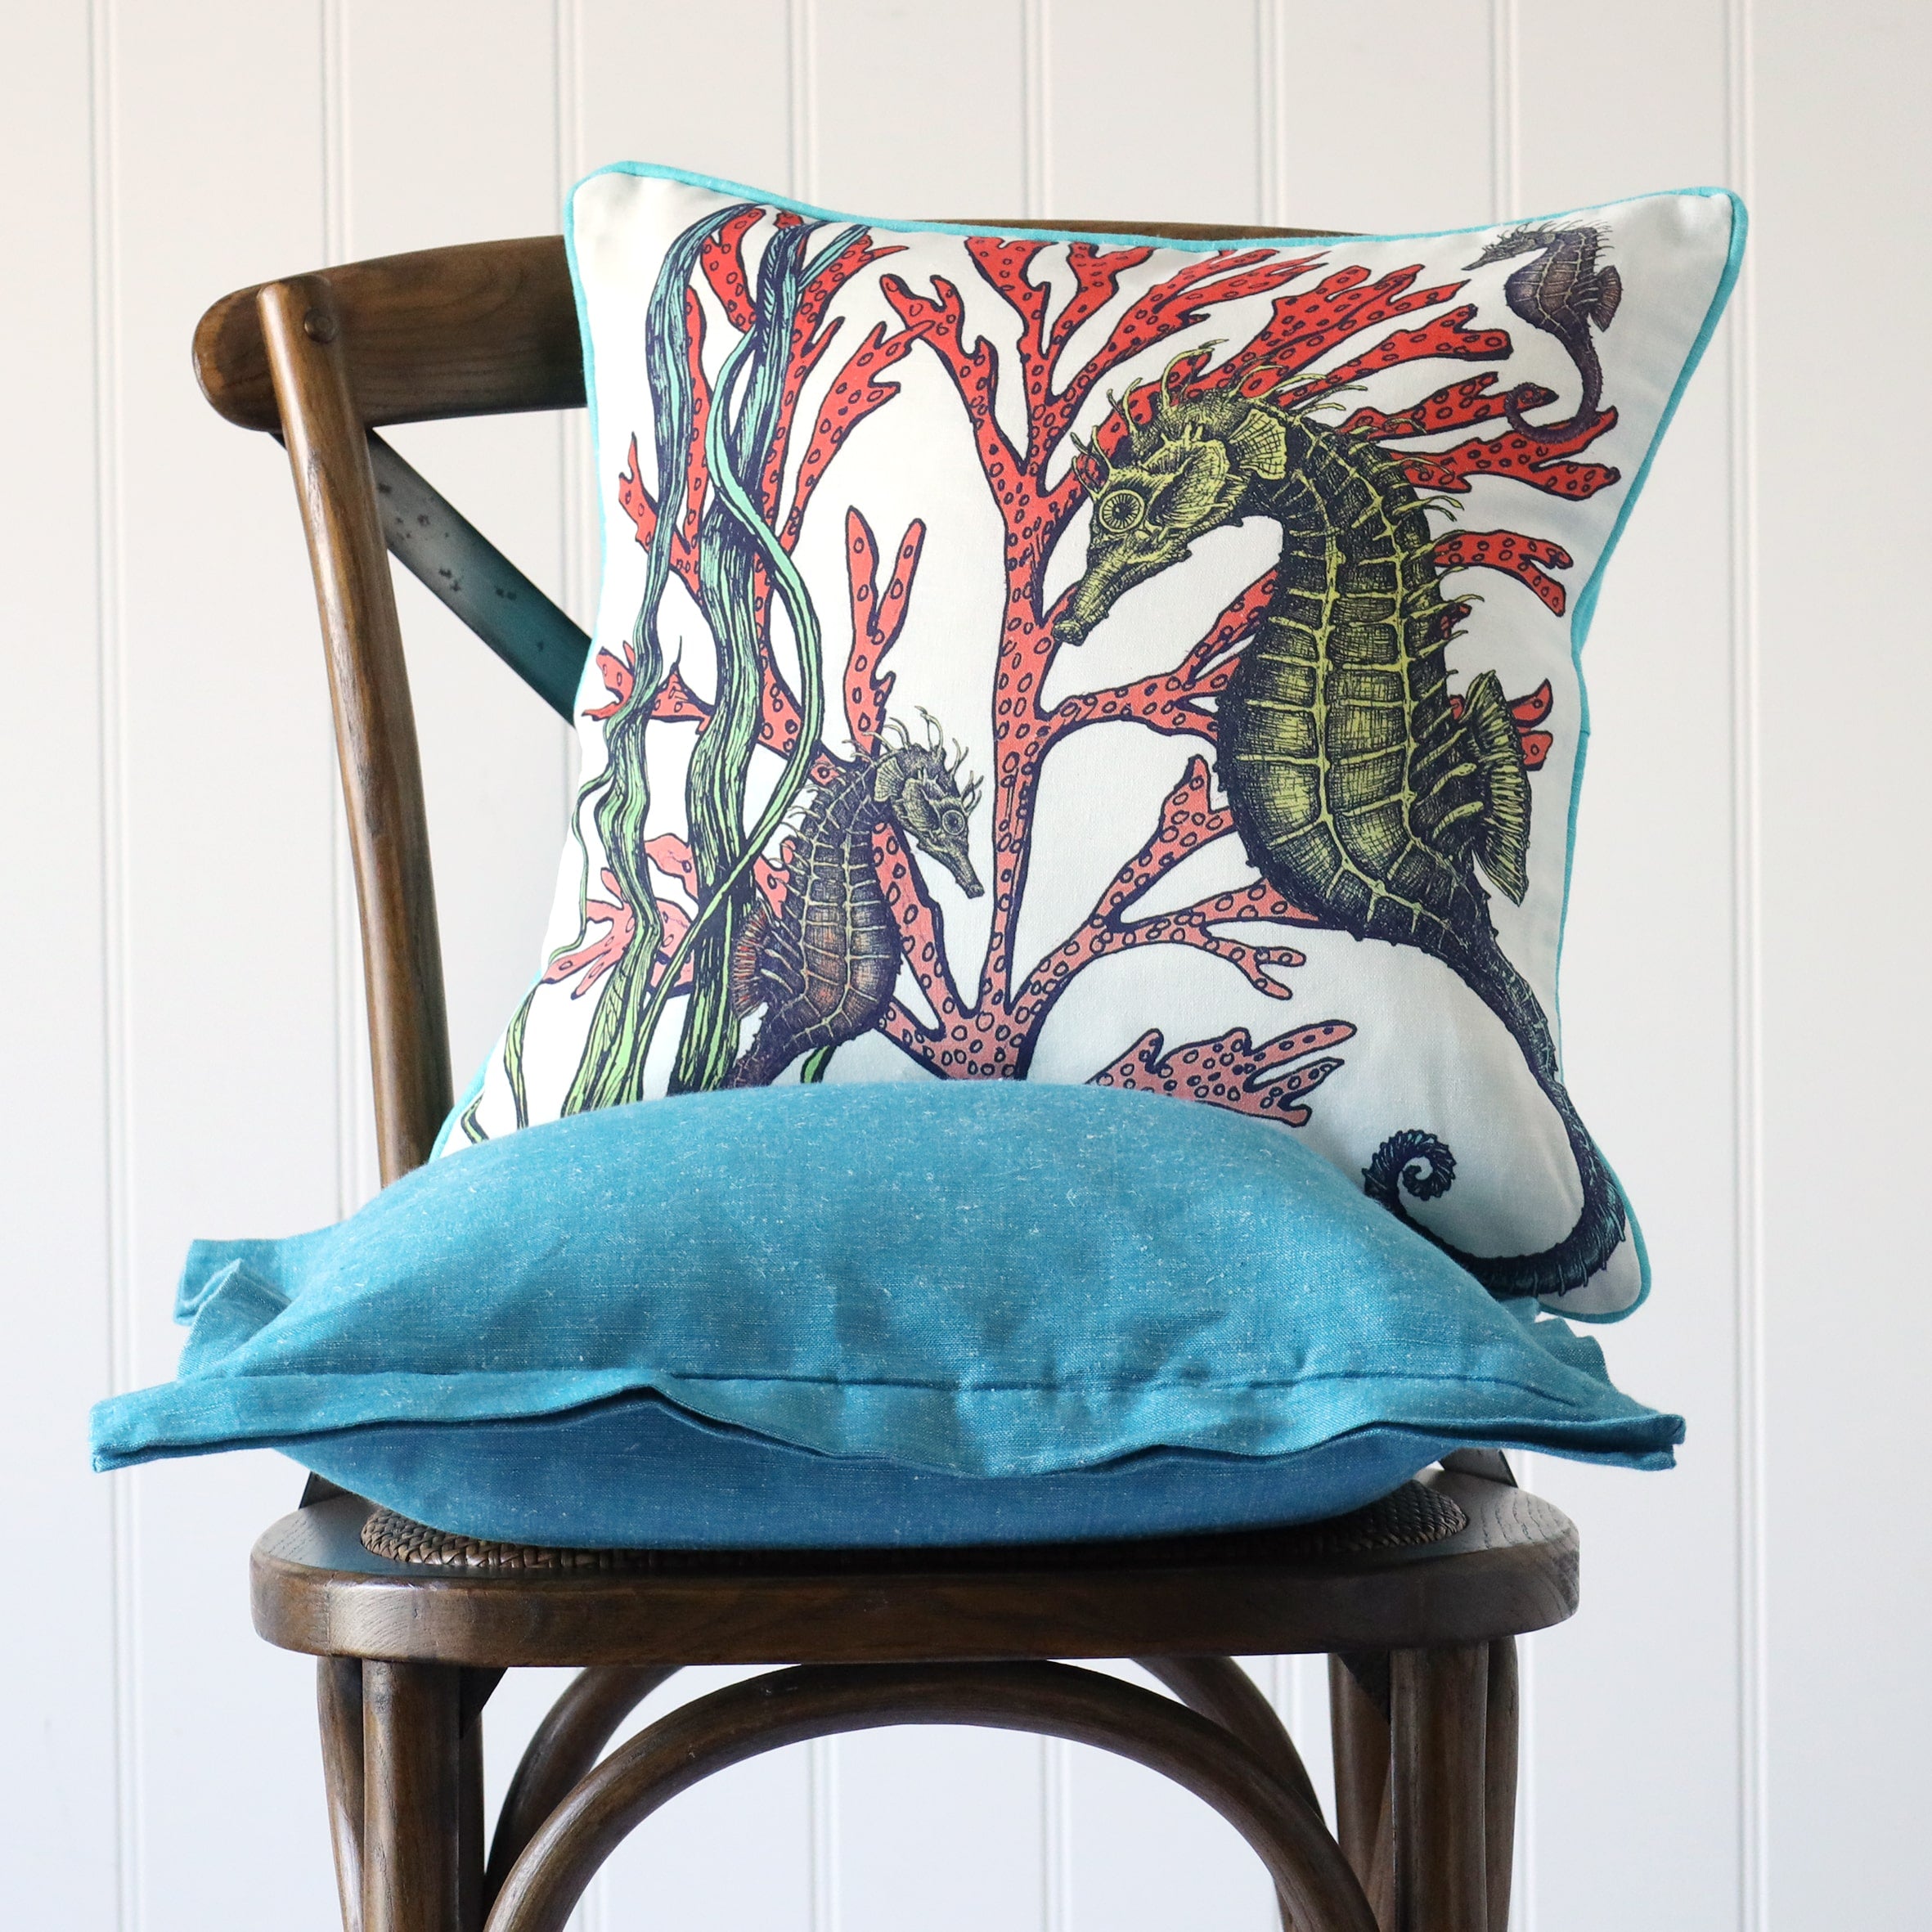 turquoise chambray cushion on a wooden chair with a brightly coloured seahorse and seaweed illustrated cushion sitting on top